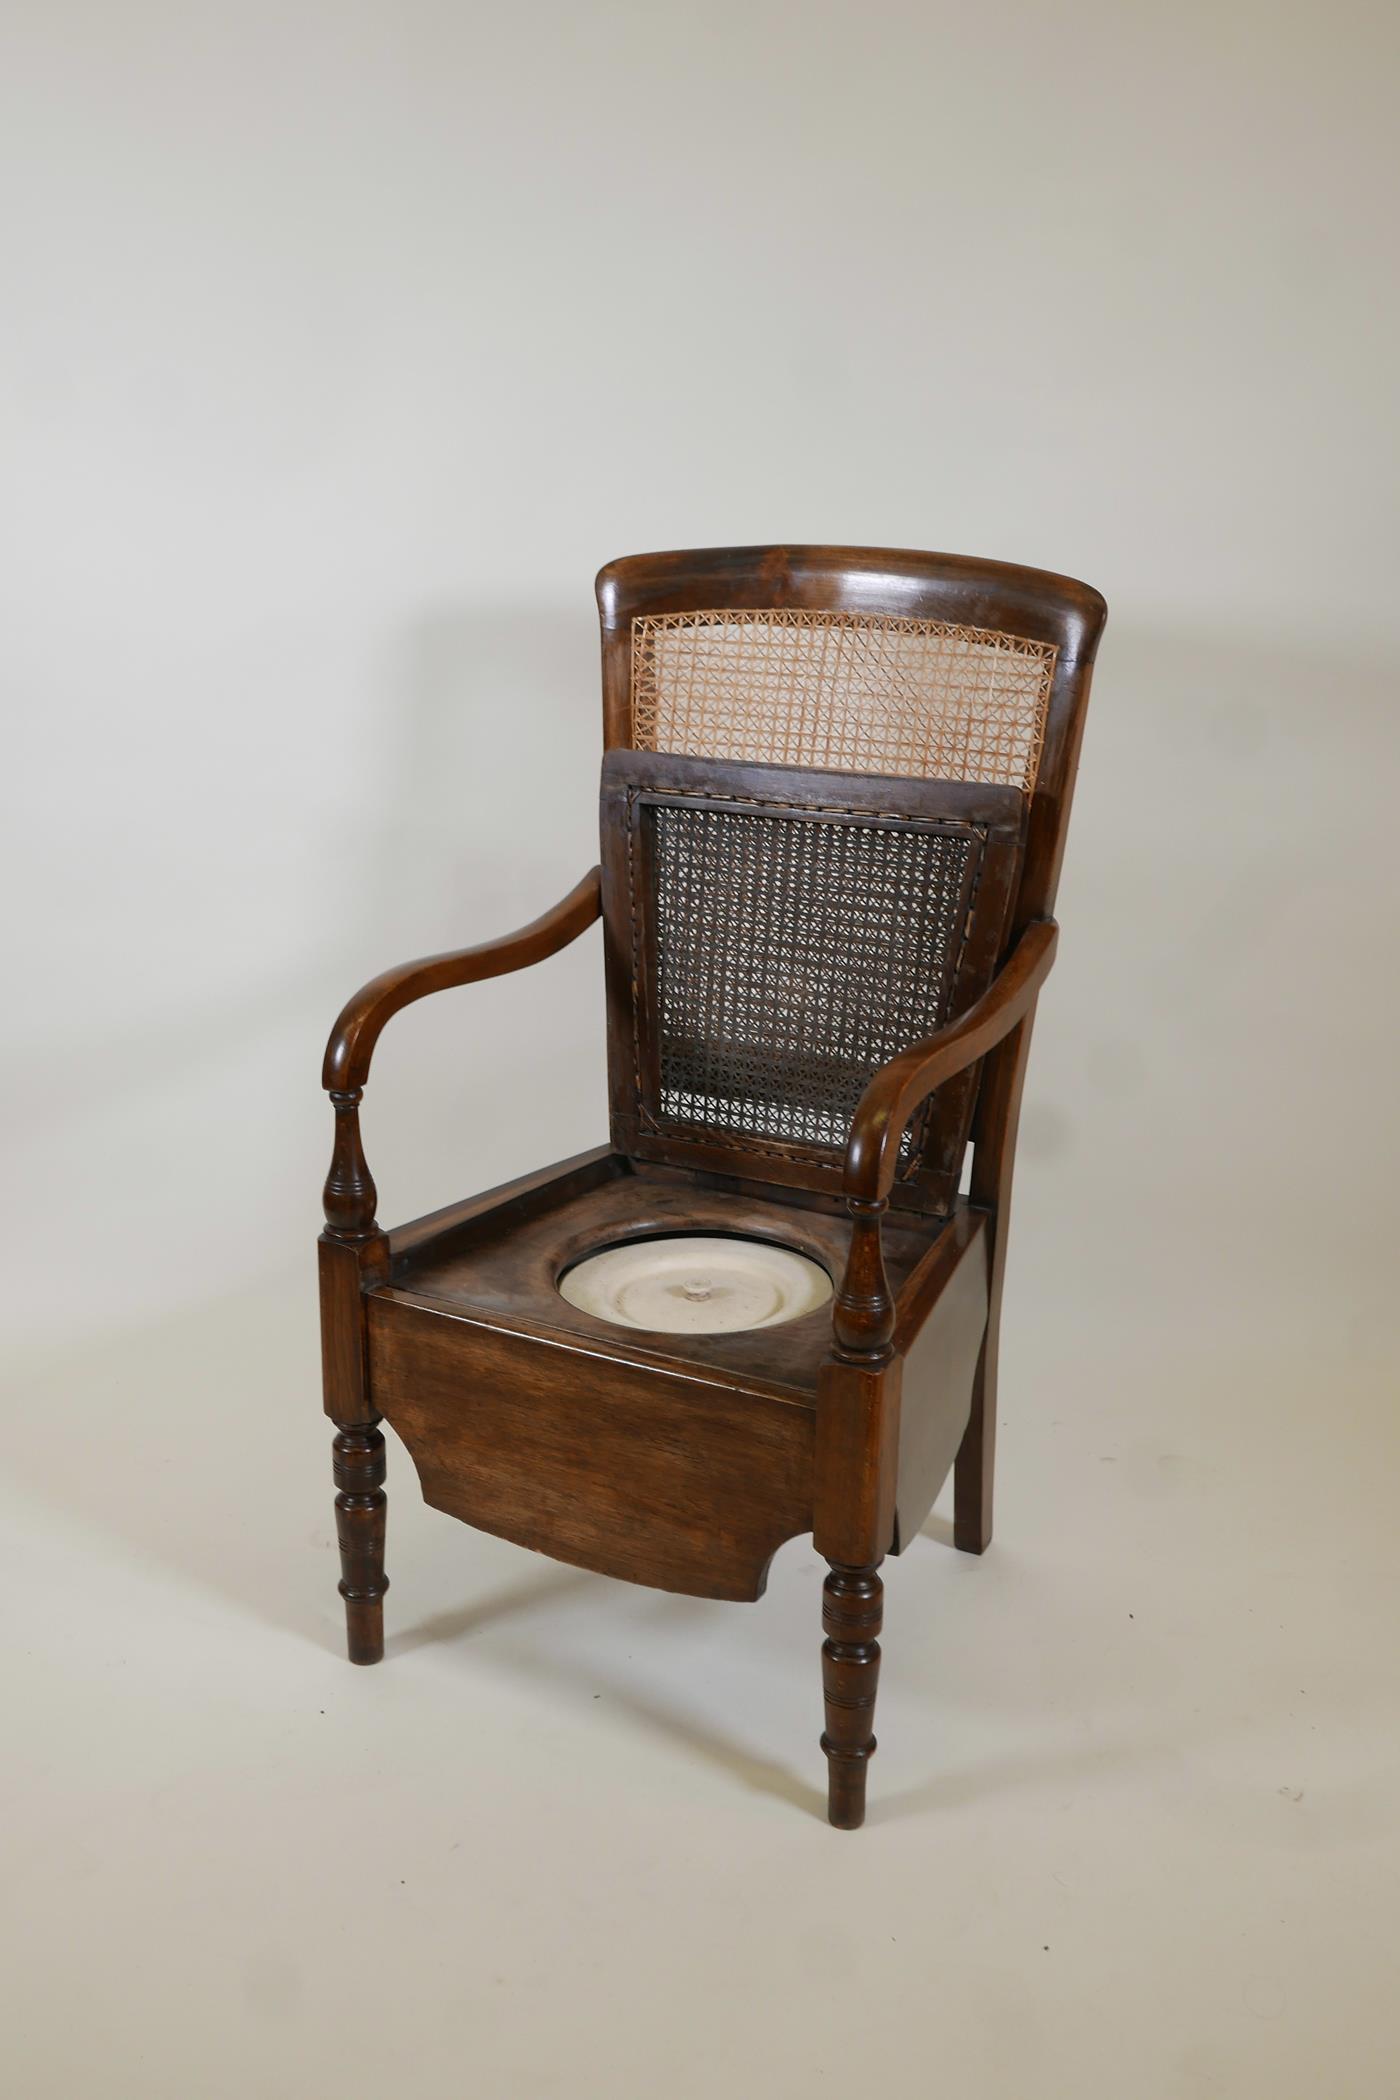 A beech framed commode armchair with bergere panel back by Carter's Ltd, 39" high - Image 2 of 3